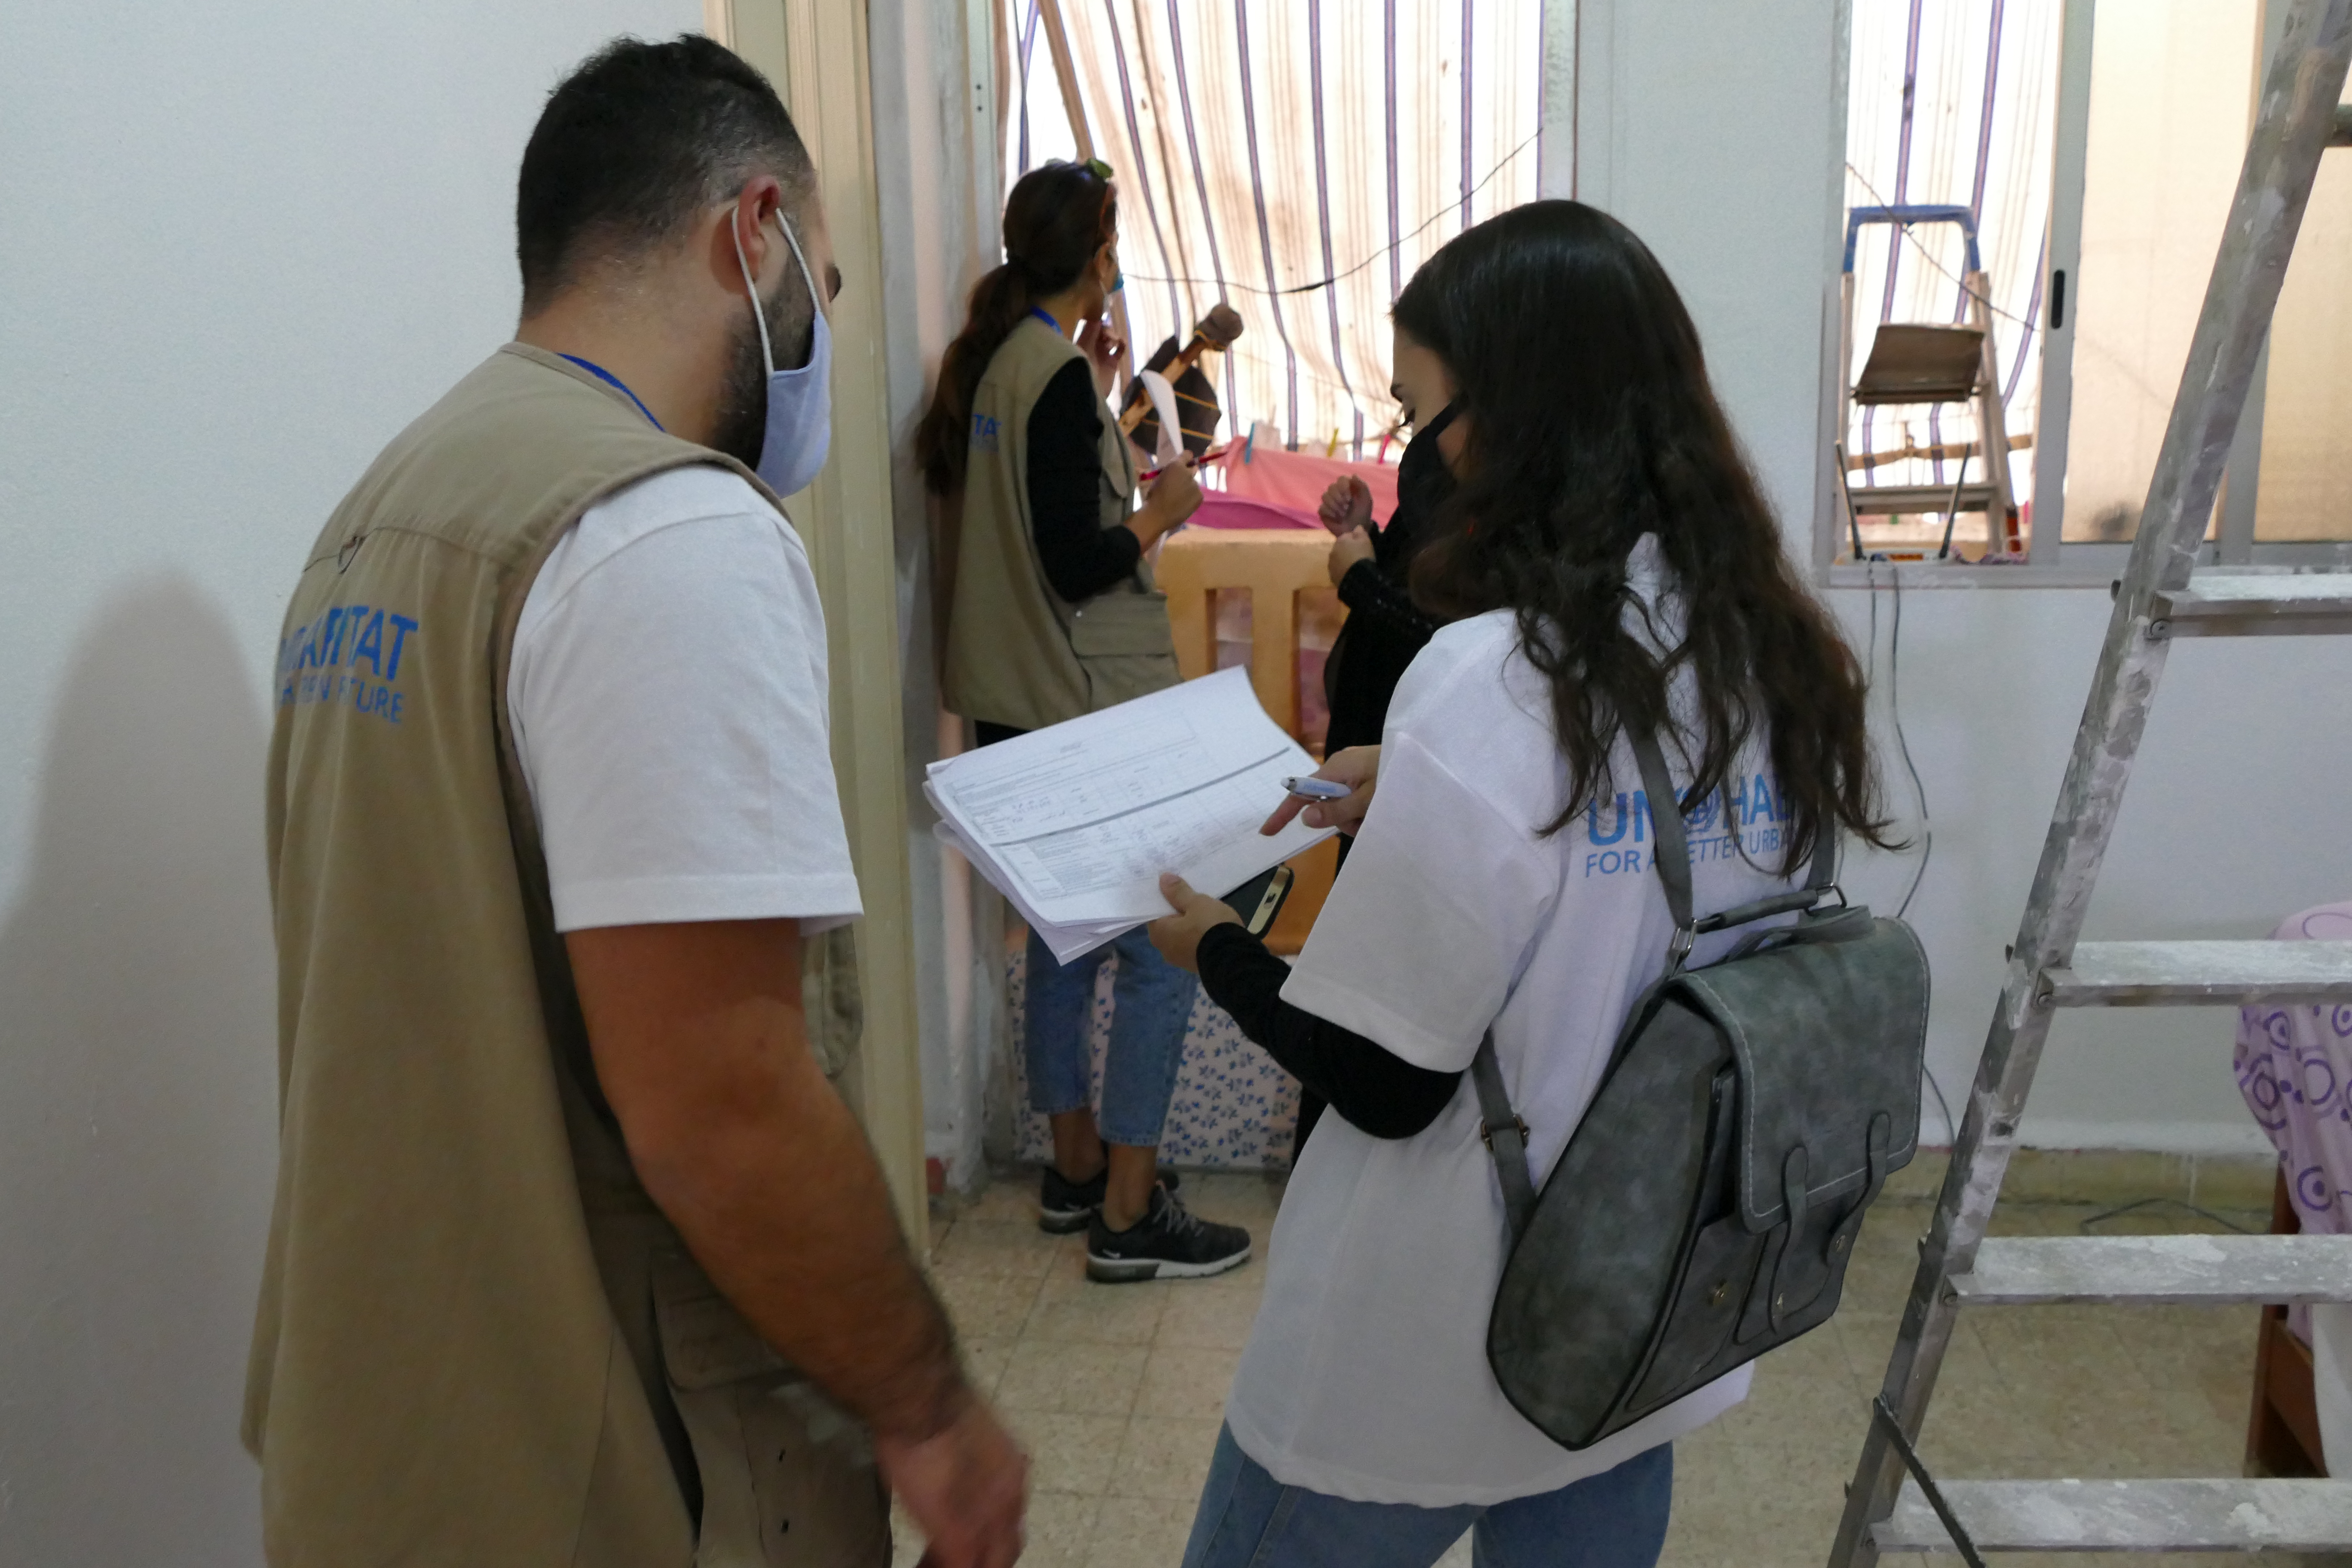 Volunteer from Lebanese University Task Force and UN-Habitat Lebanon staff conduct an eligibility assessment in one of the homes shortlisted to possibly benefit from the Kuwait-IICO funded project.